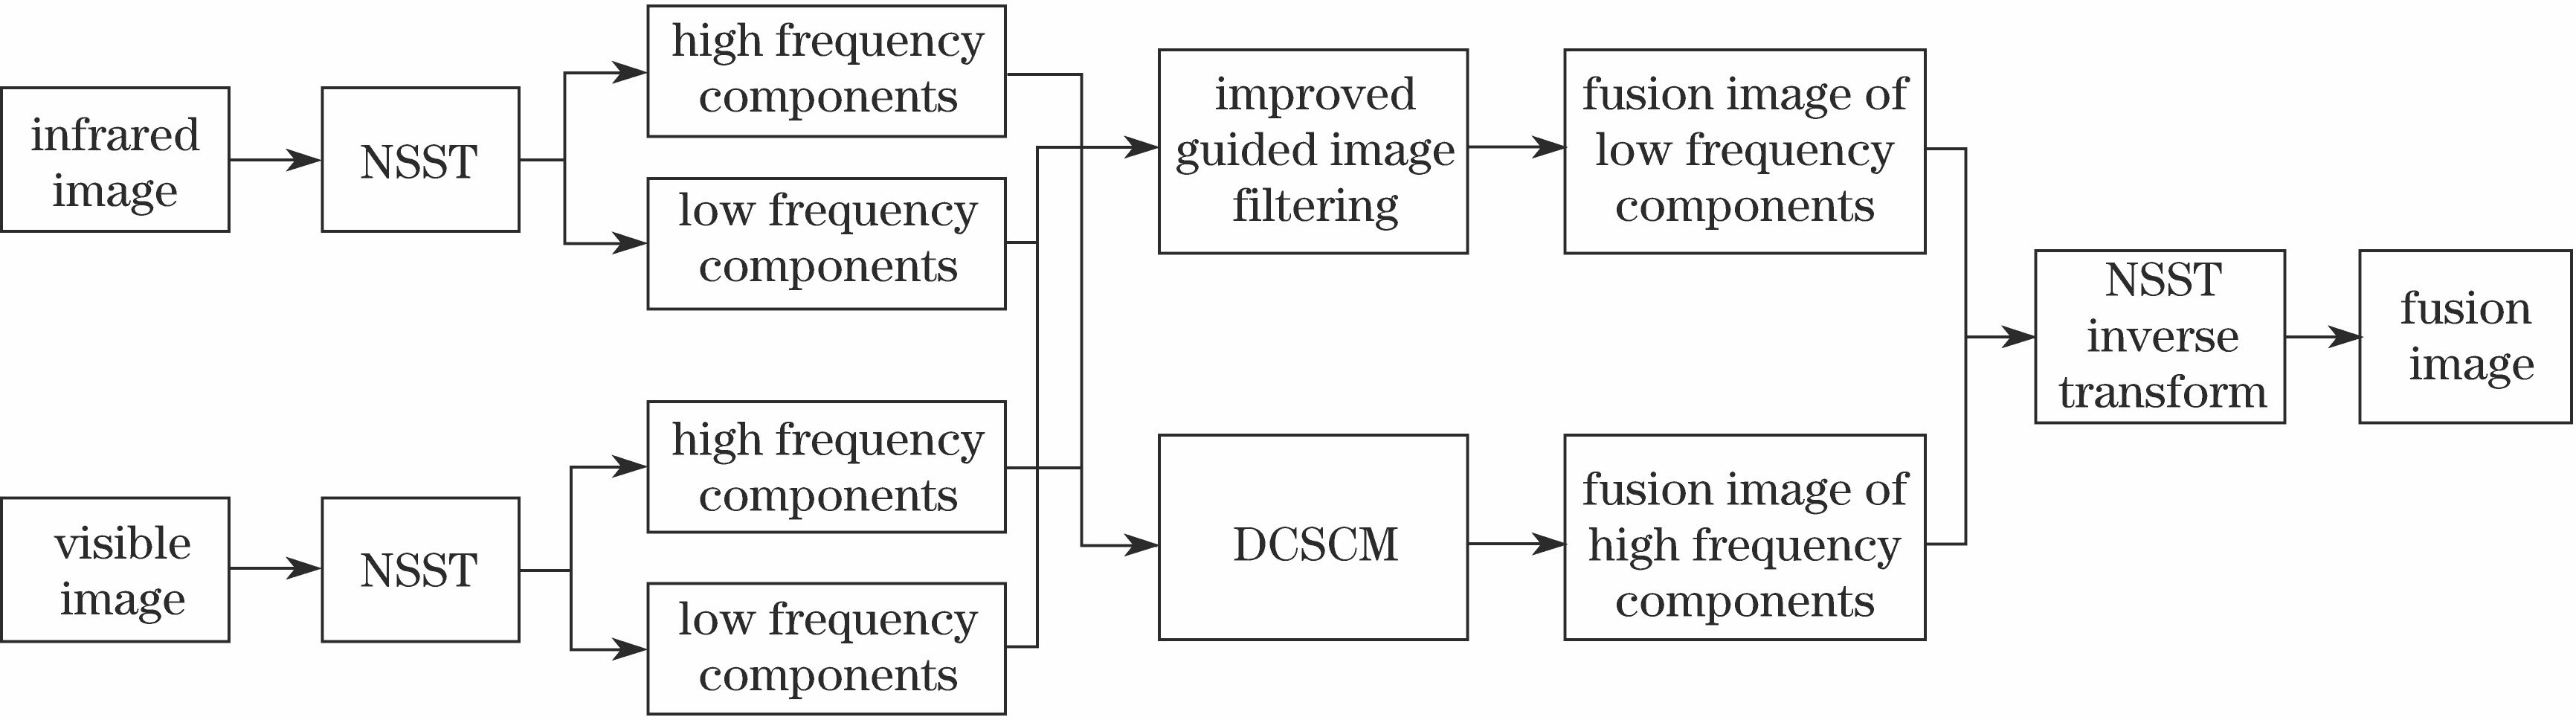 Flow chart of the proposed fusion algorithm